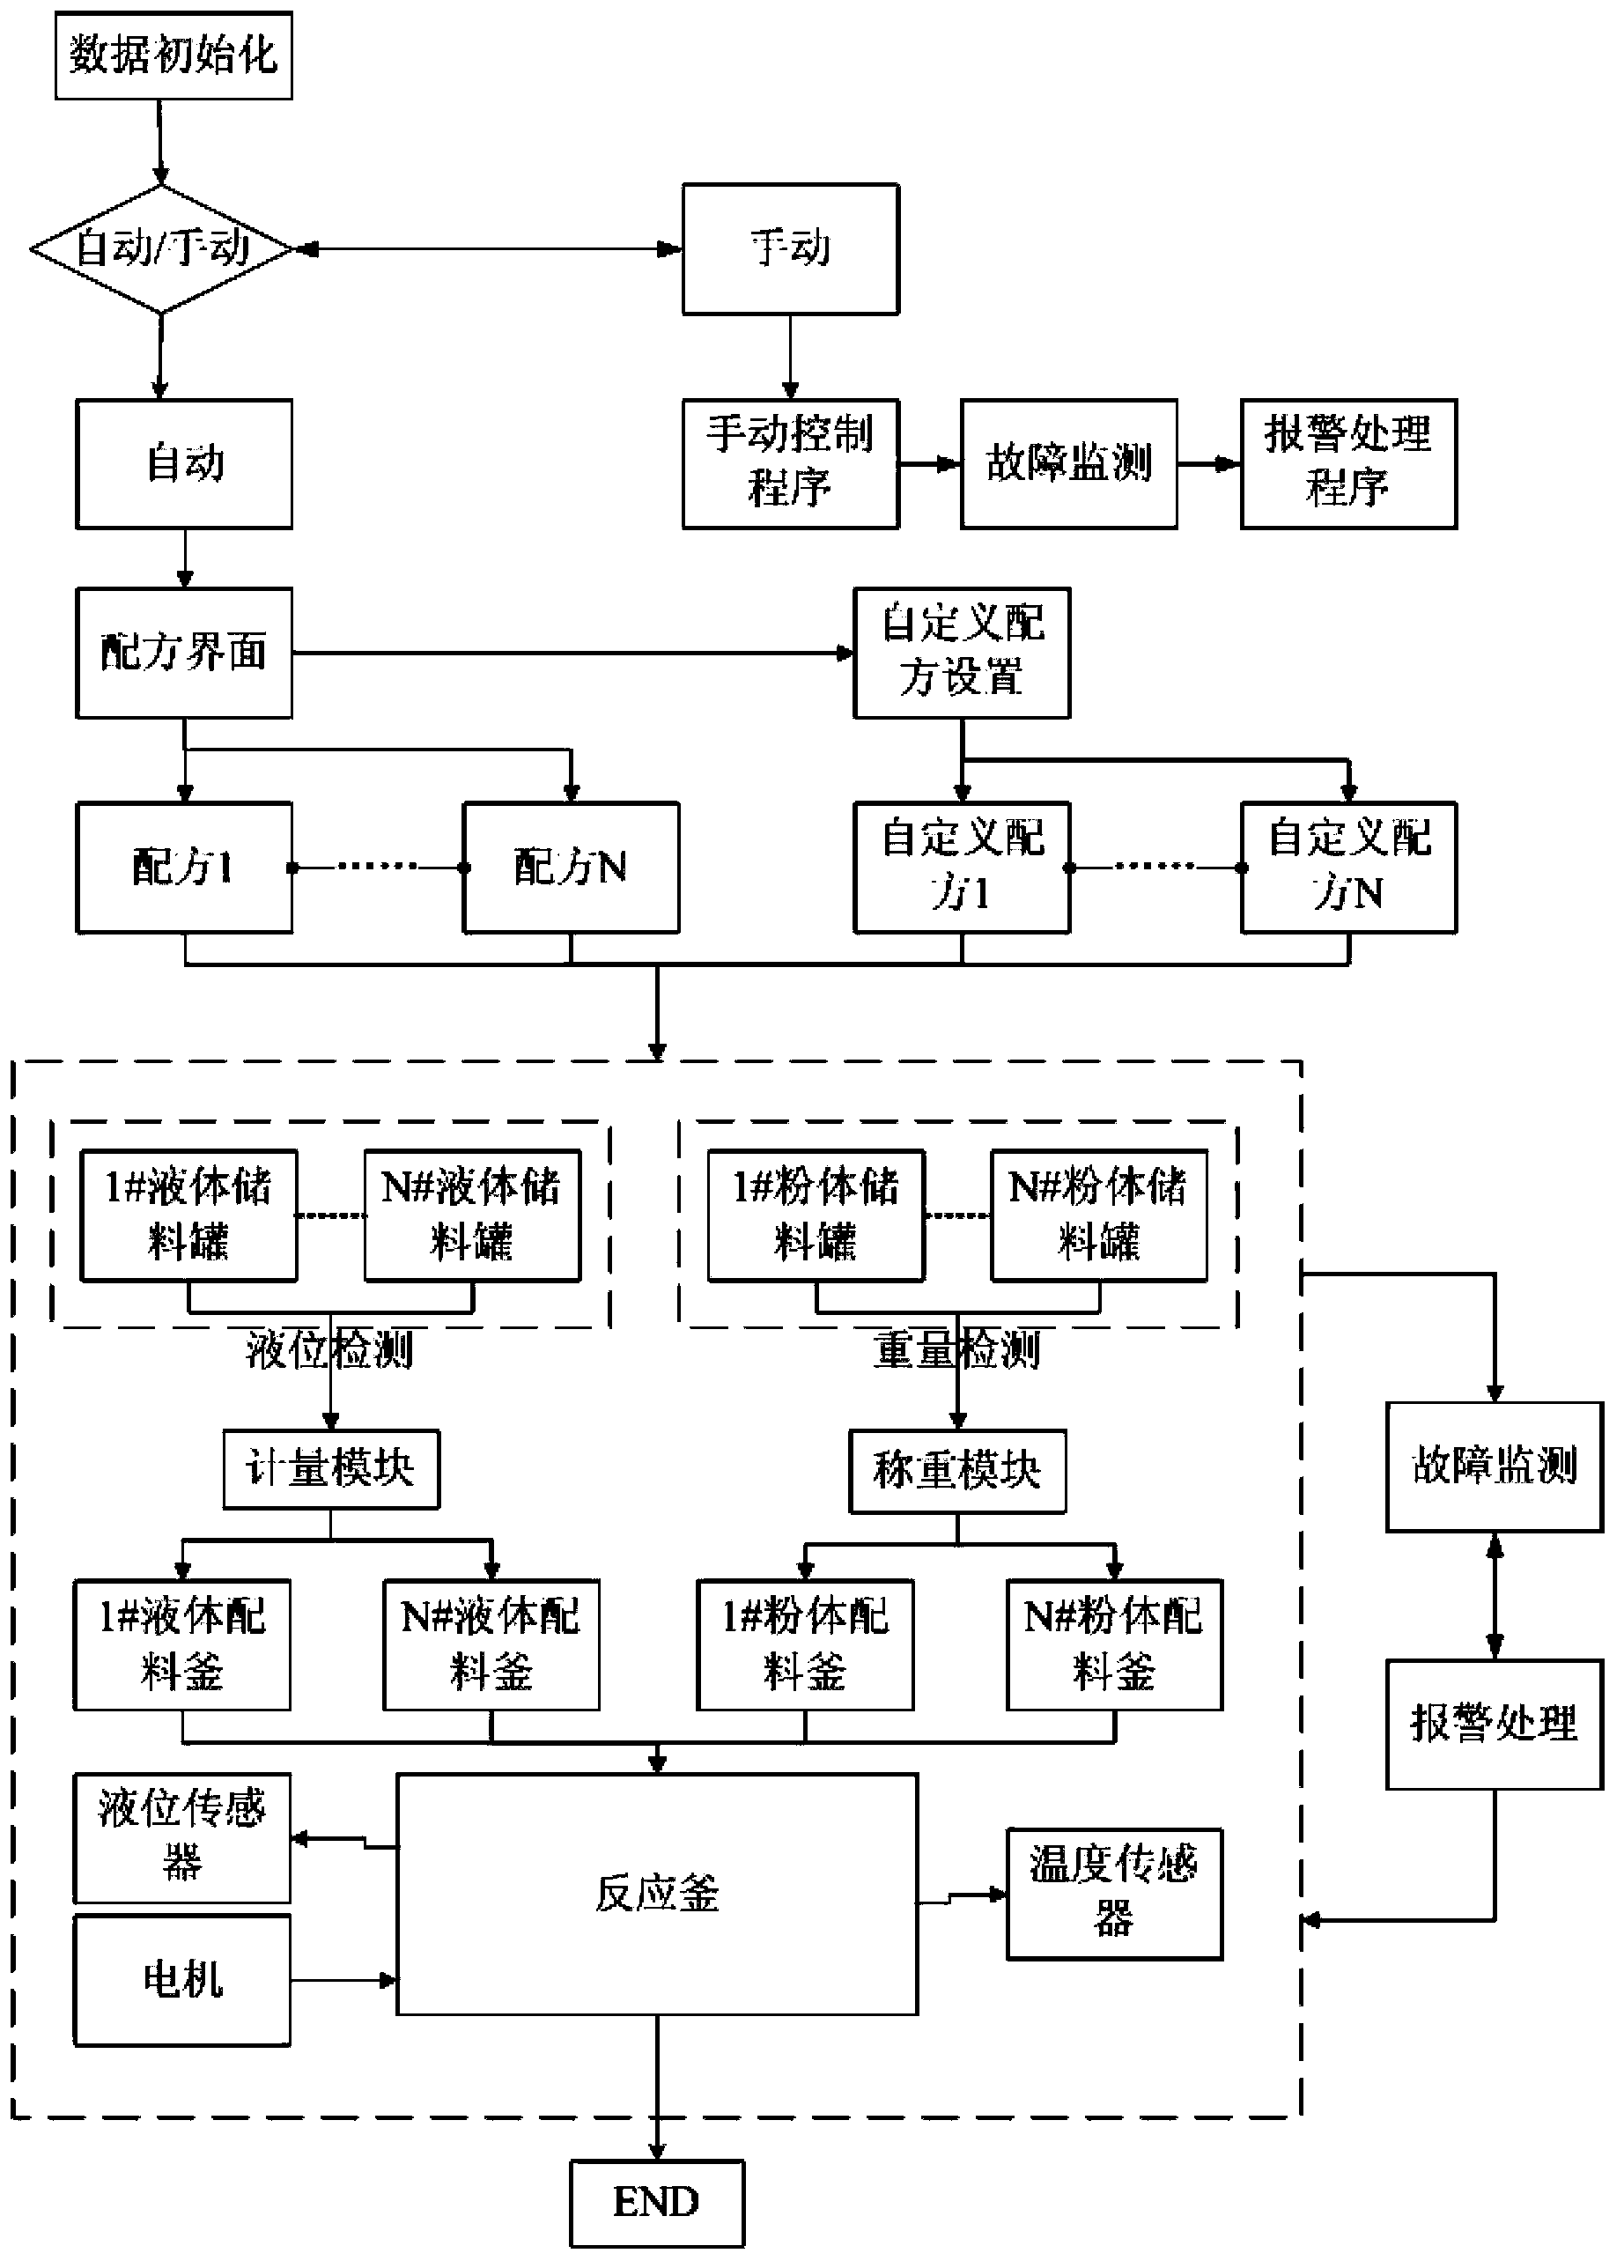 DCS control system for material processing